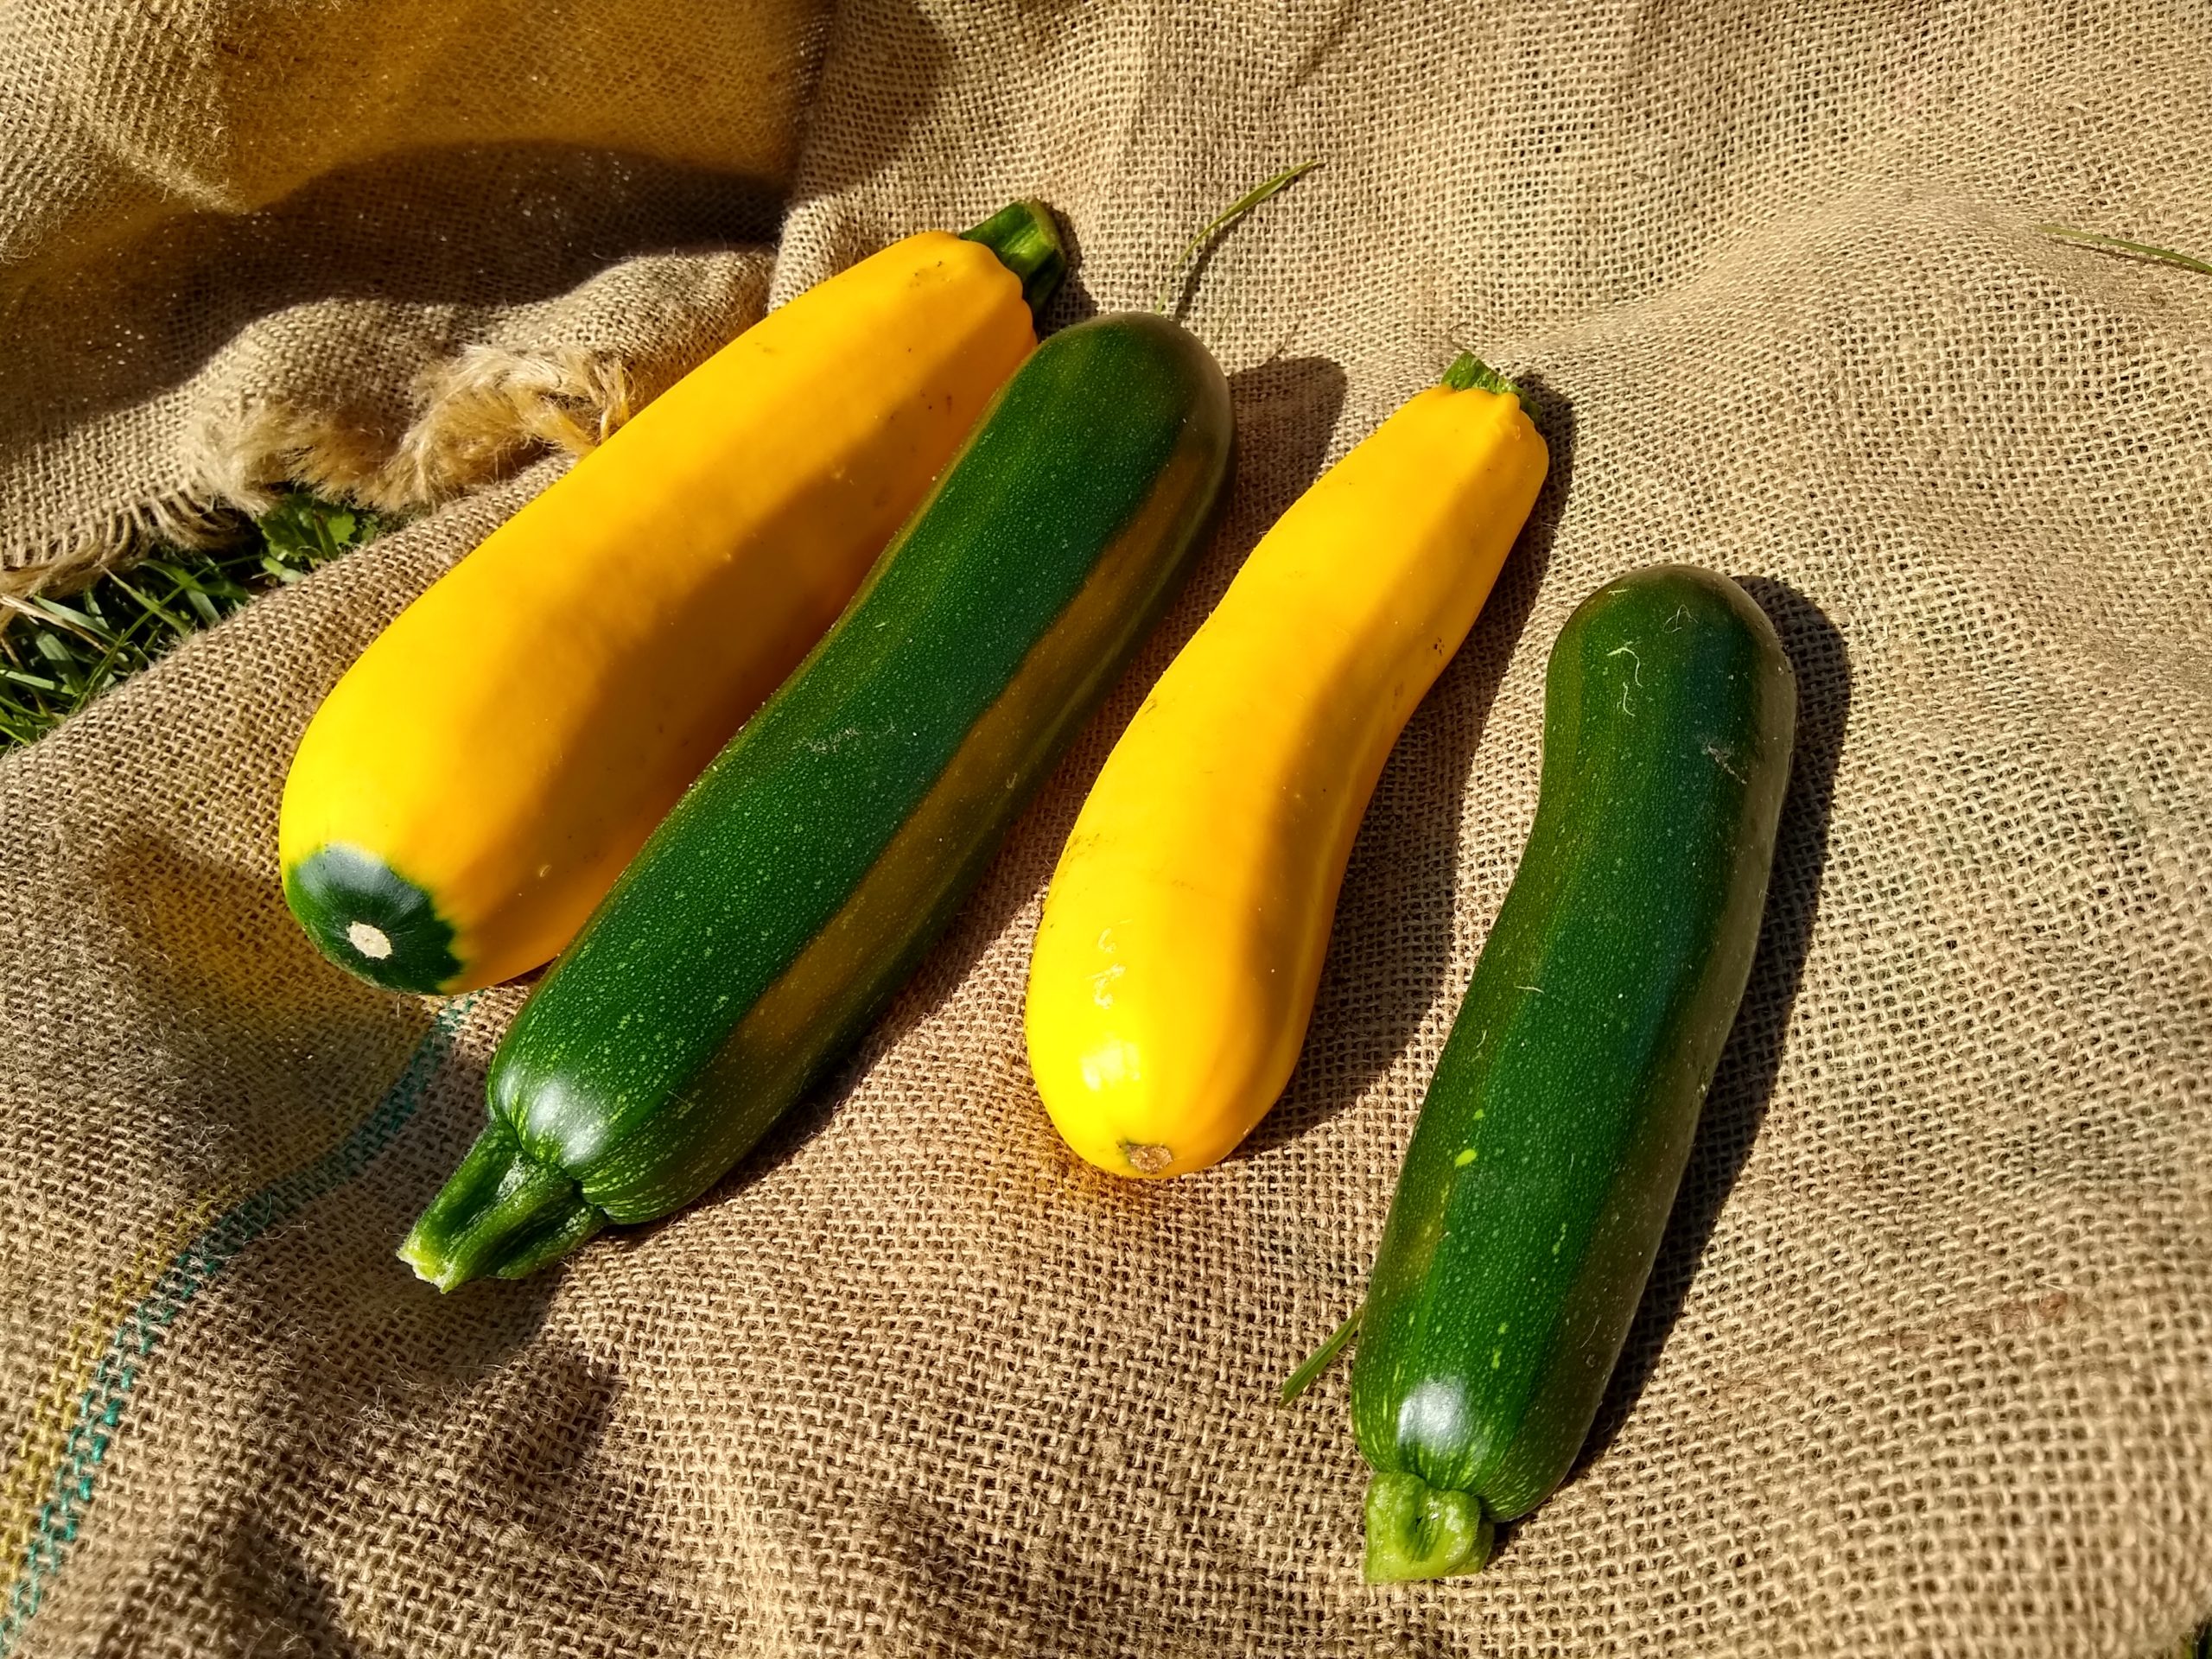 2 yellow and 2 green zucchini on a burlap cloth